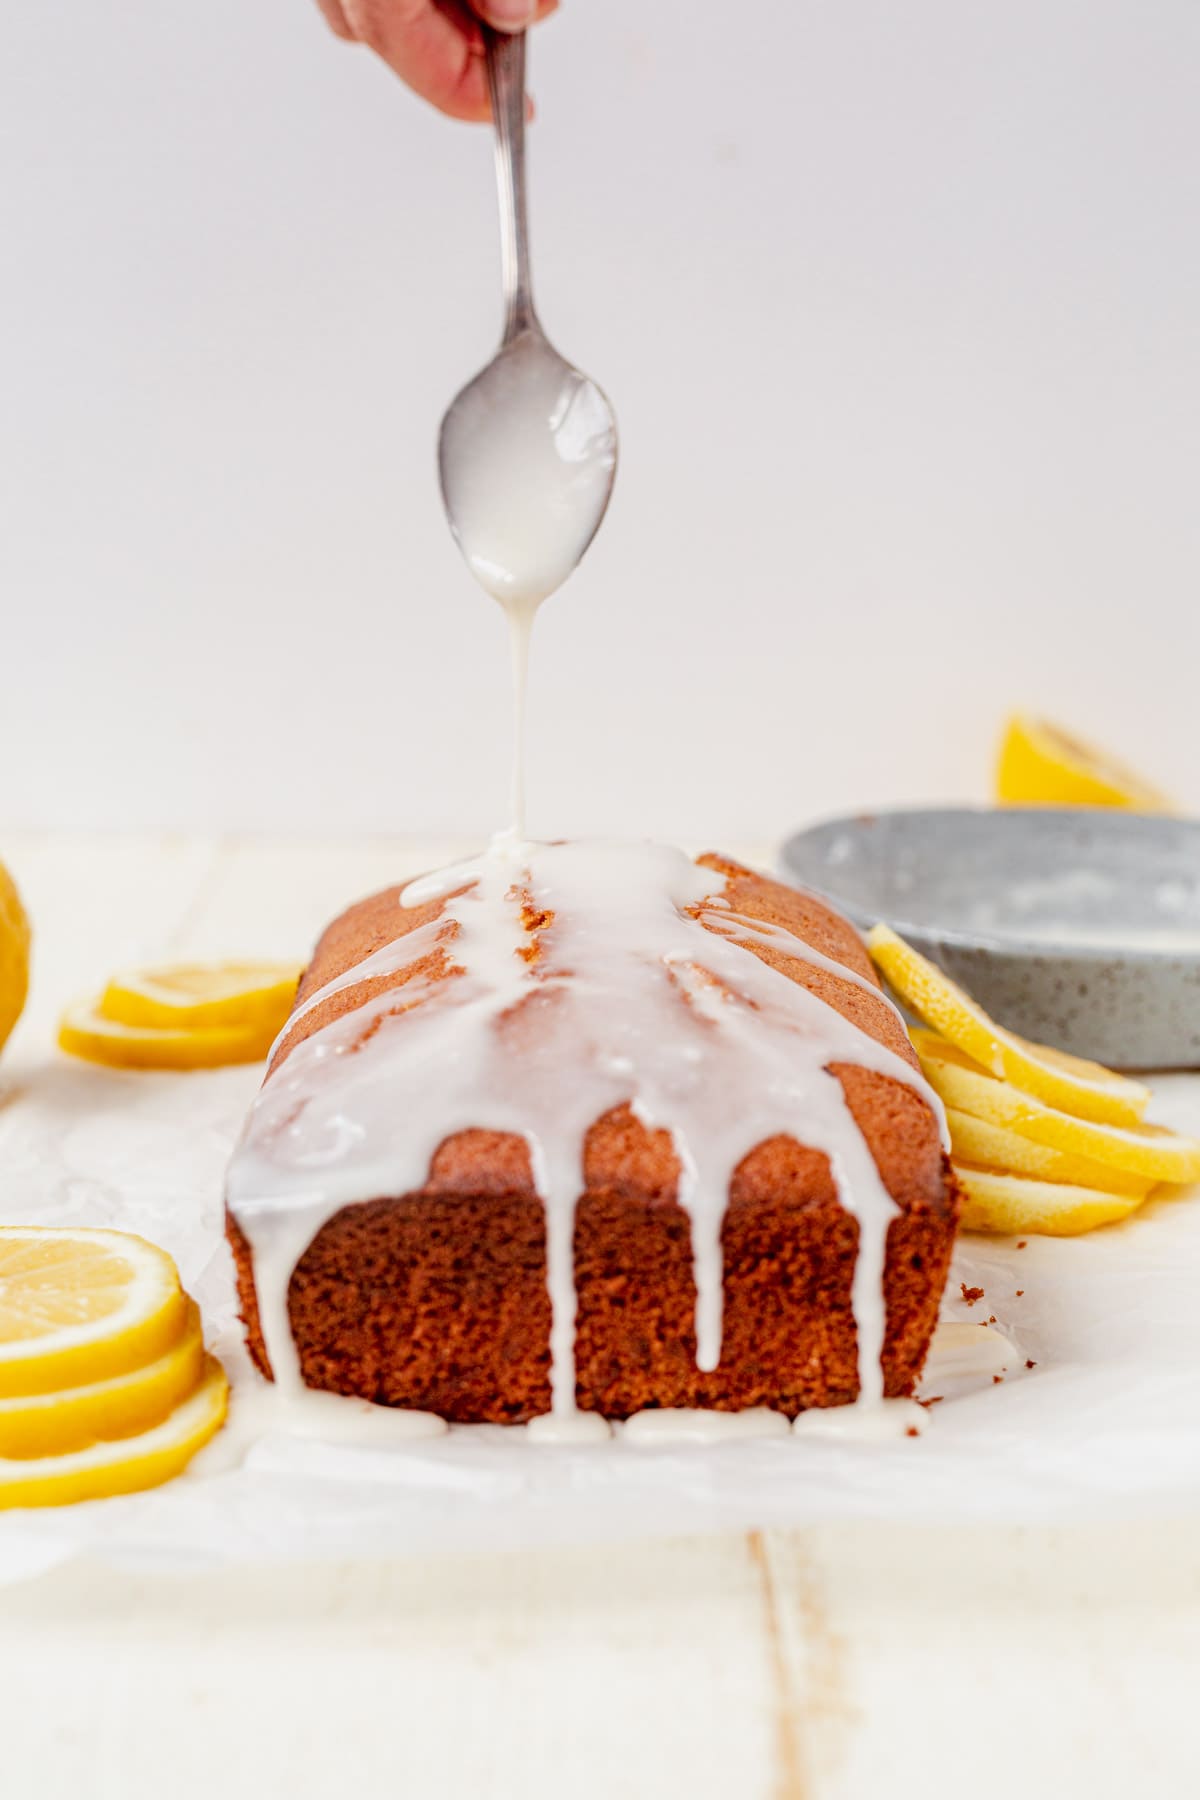 drizzling icing on top of gluten-free lemon loaf cake